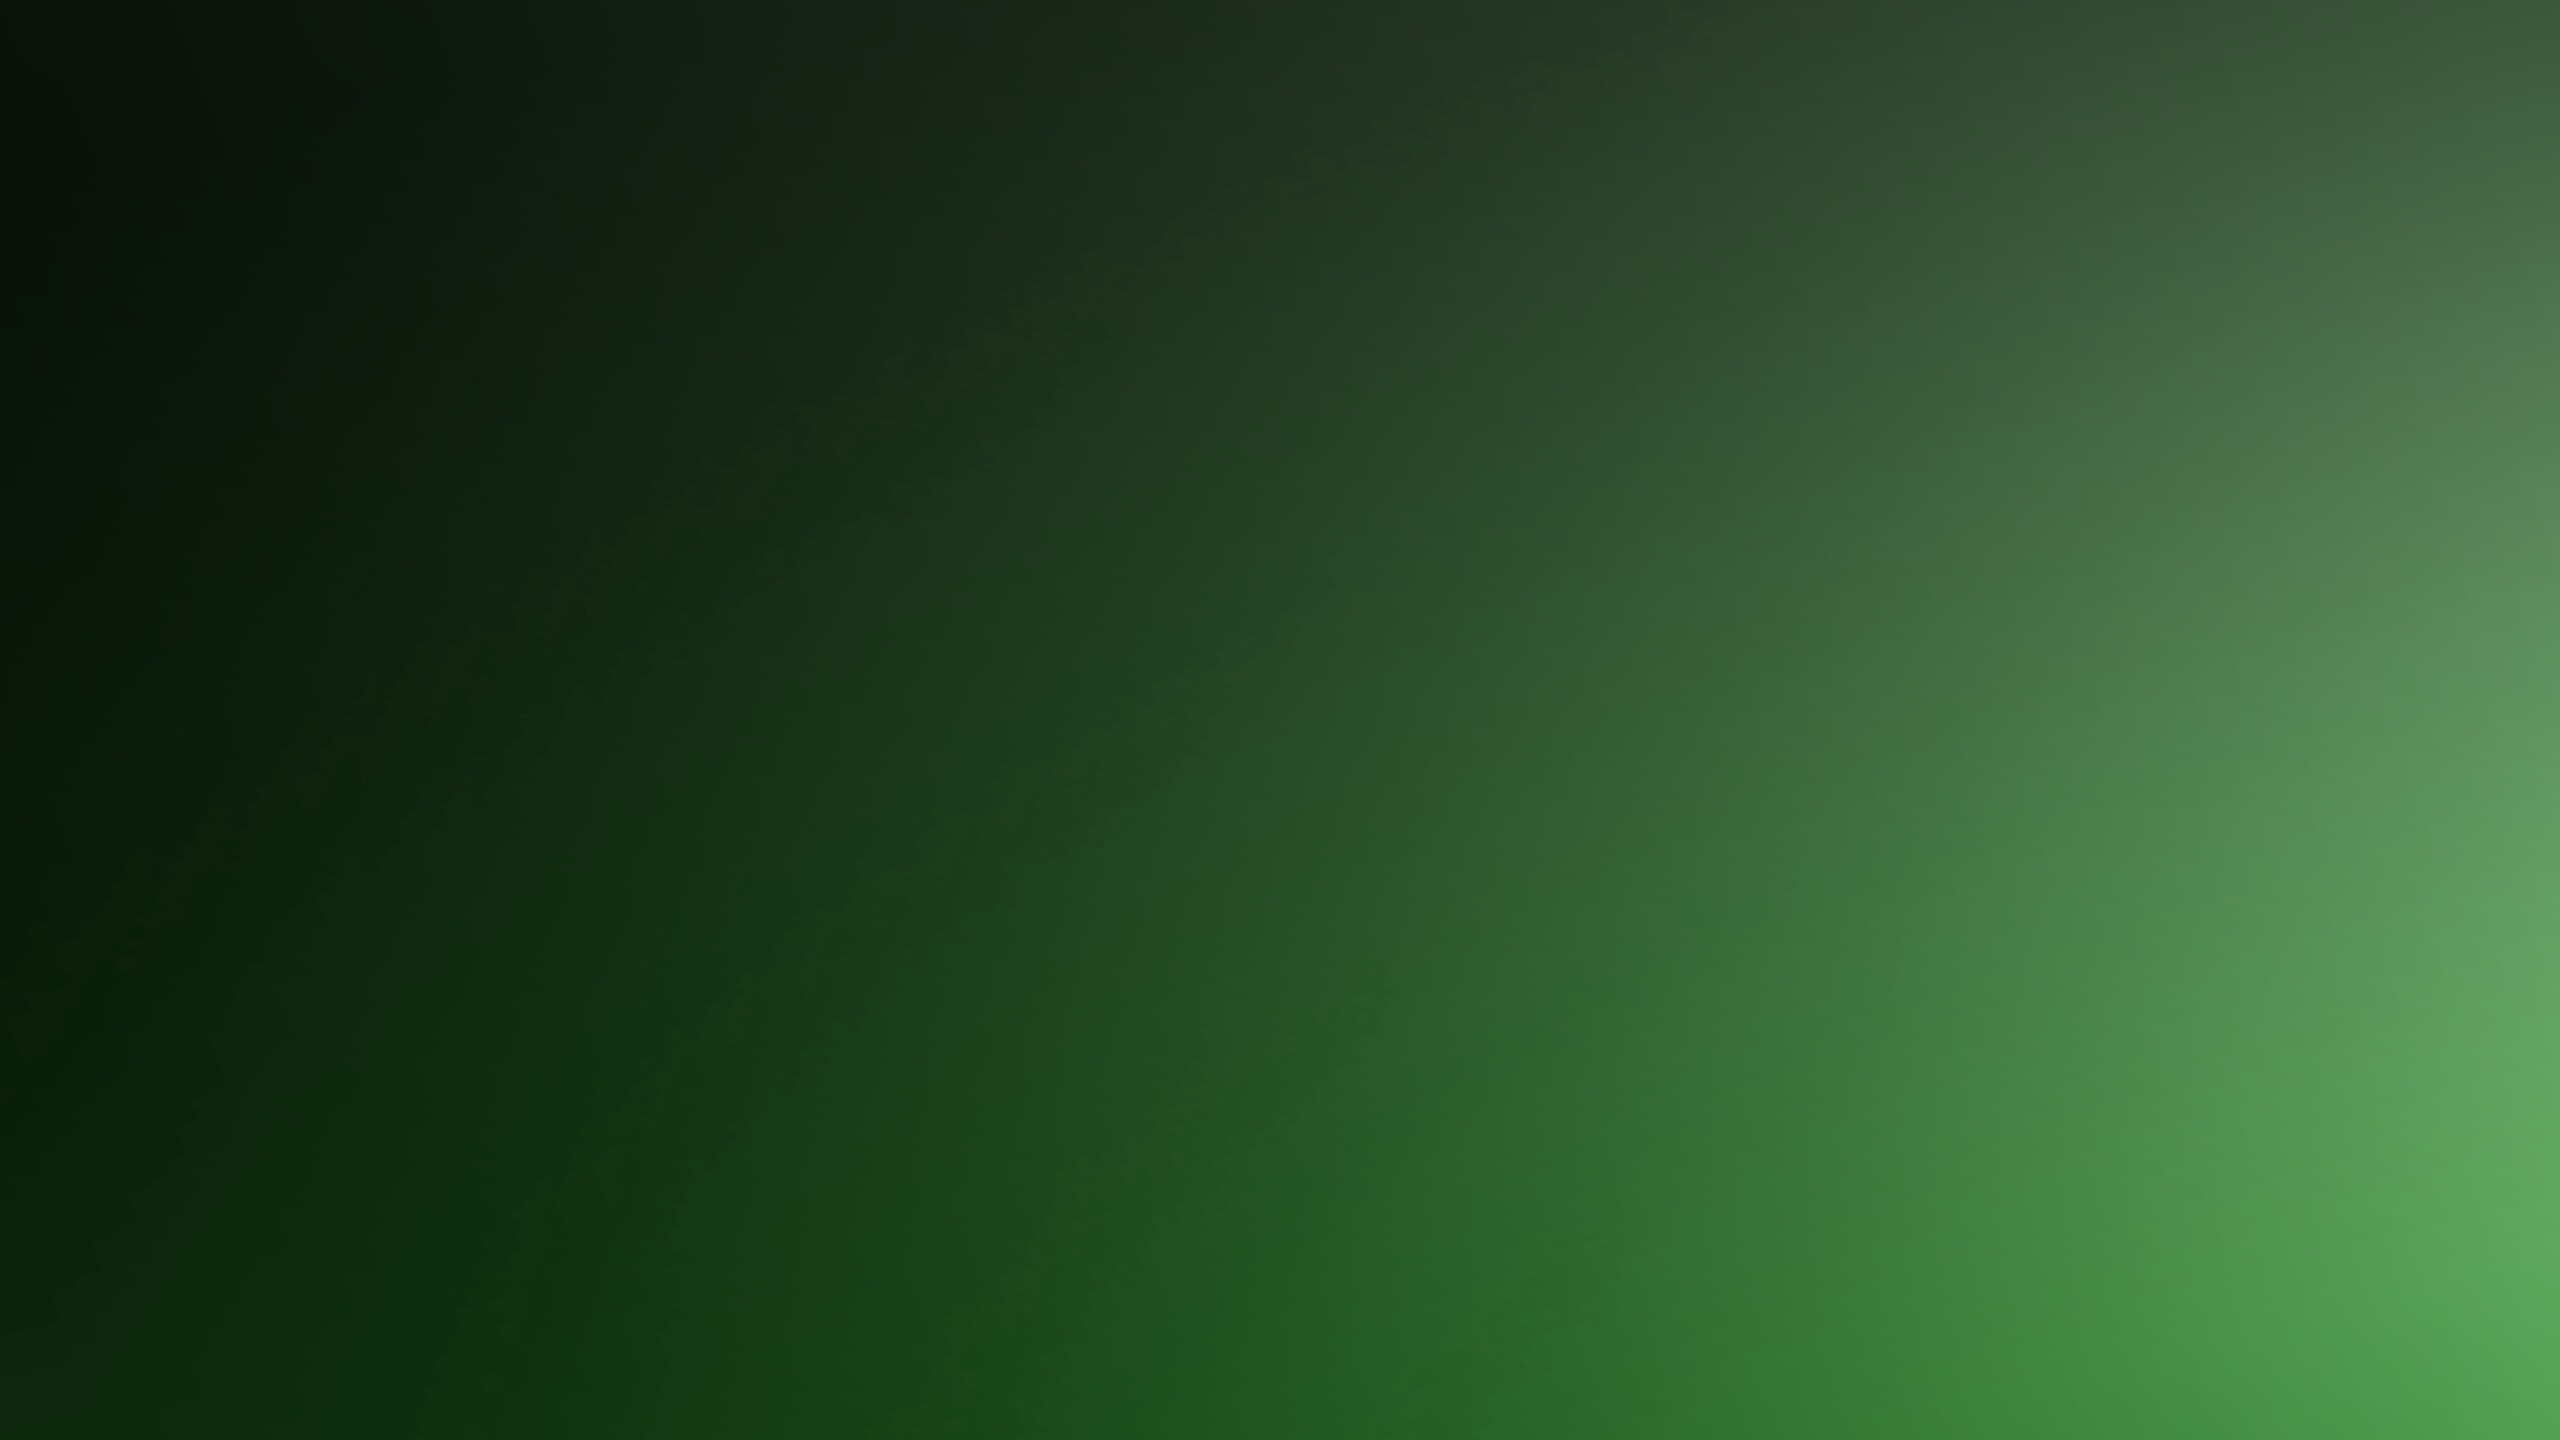 2560x1440, Wallpaper Green, Background, Texture, Solid, - Dark Green Fade  Background - 2560x1440 Wallpaper 